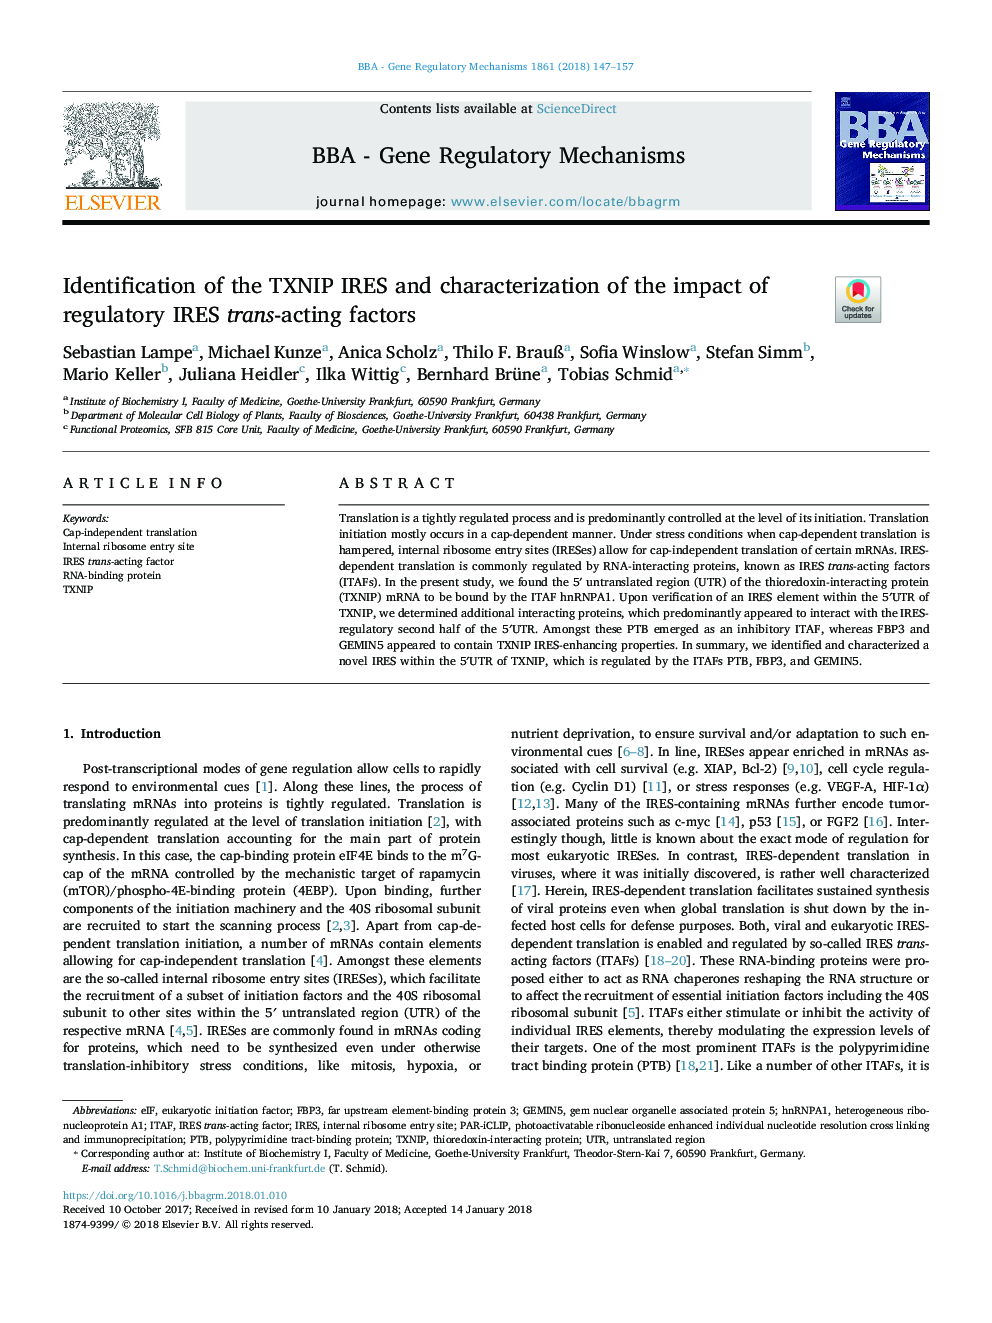 Identification of the TXNIP IRES and characterization of the impact of regulatory IRES trans-acting factors